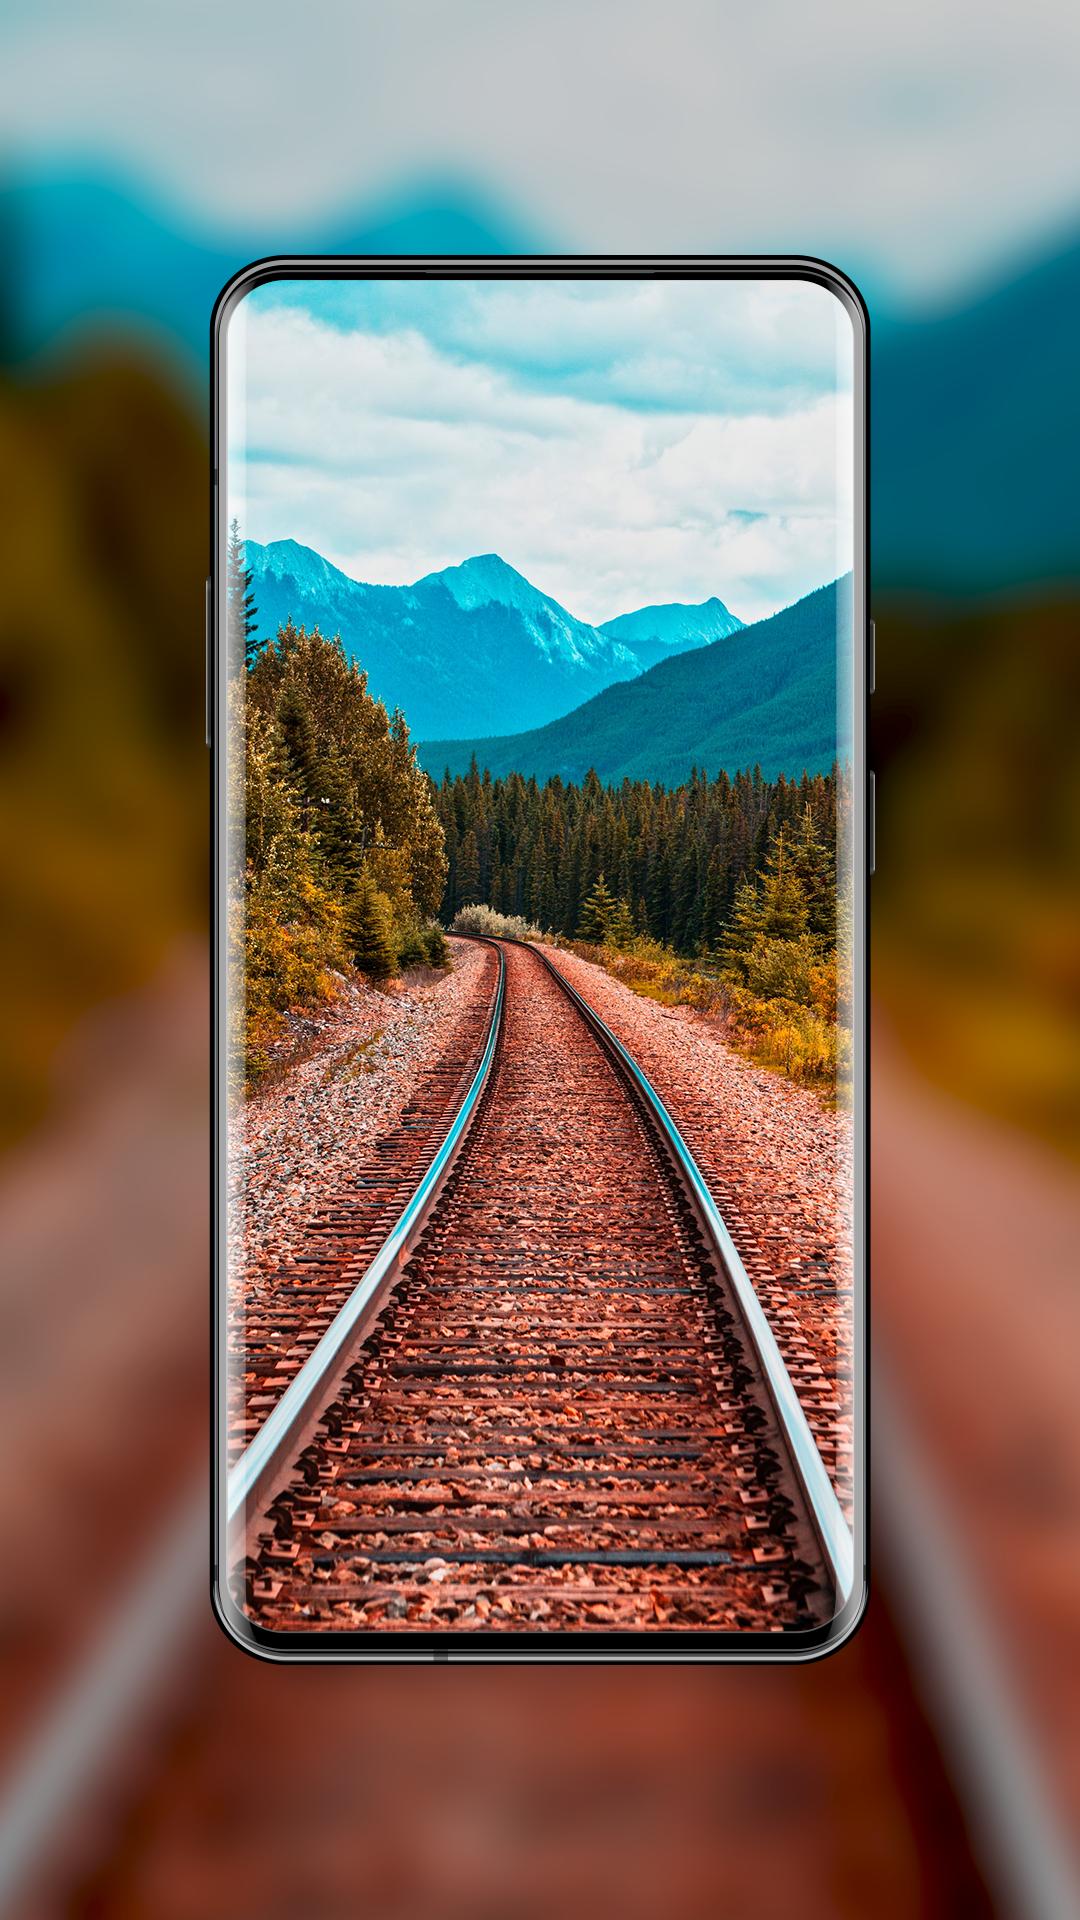  4K  Wallpapers  HD  QHD  Backgrounds  for Android APK  